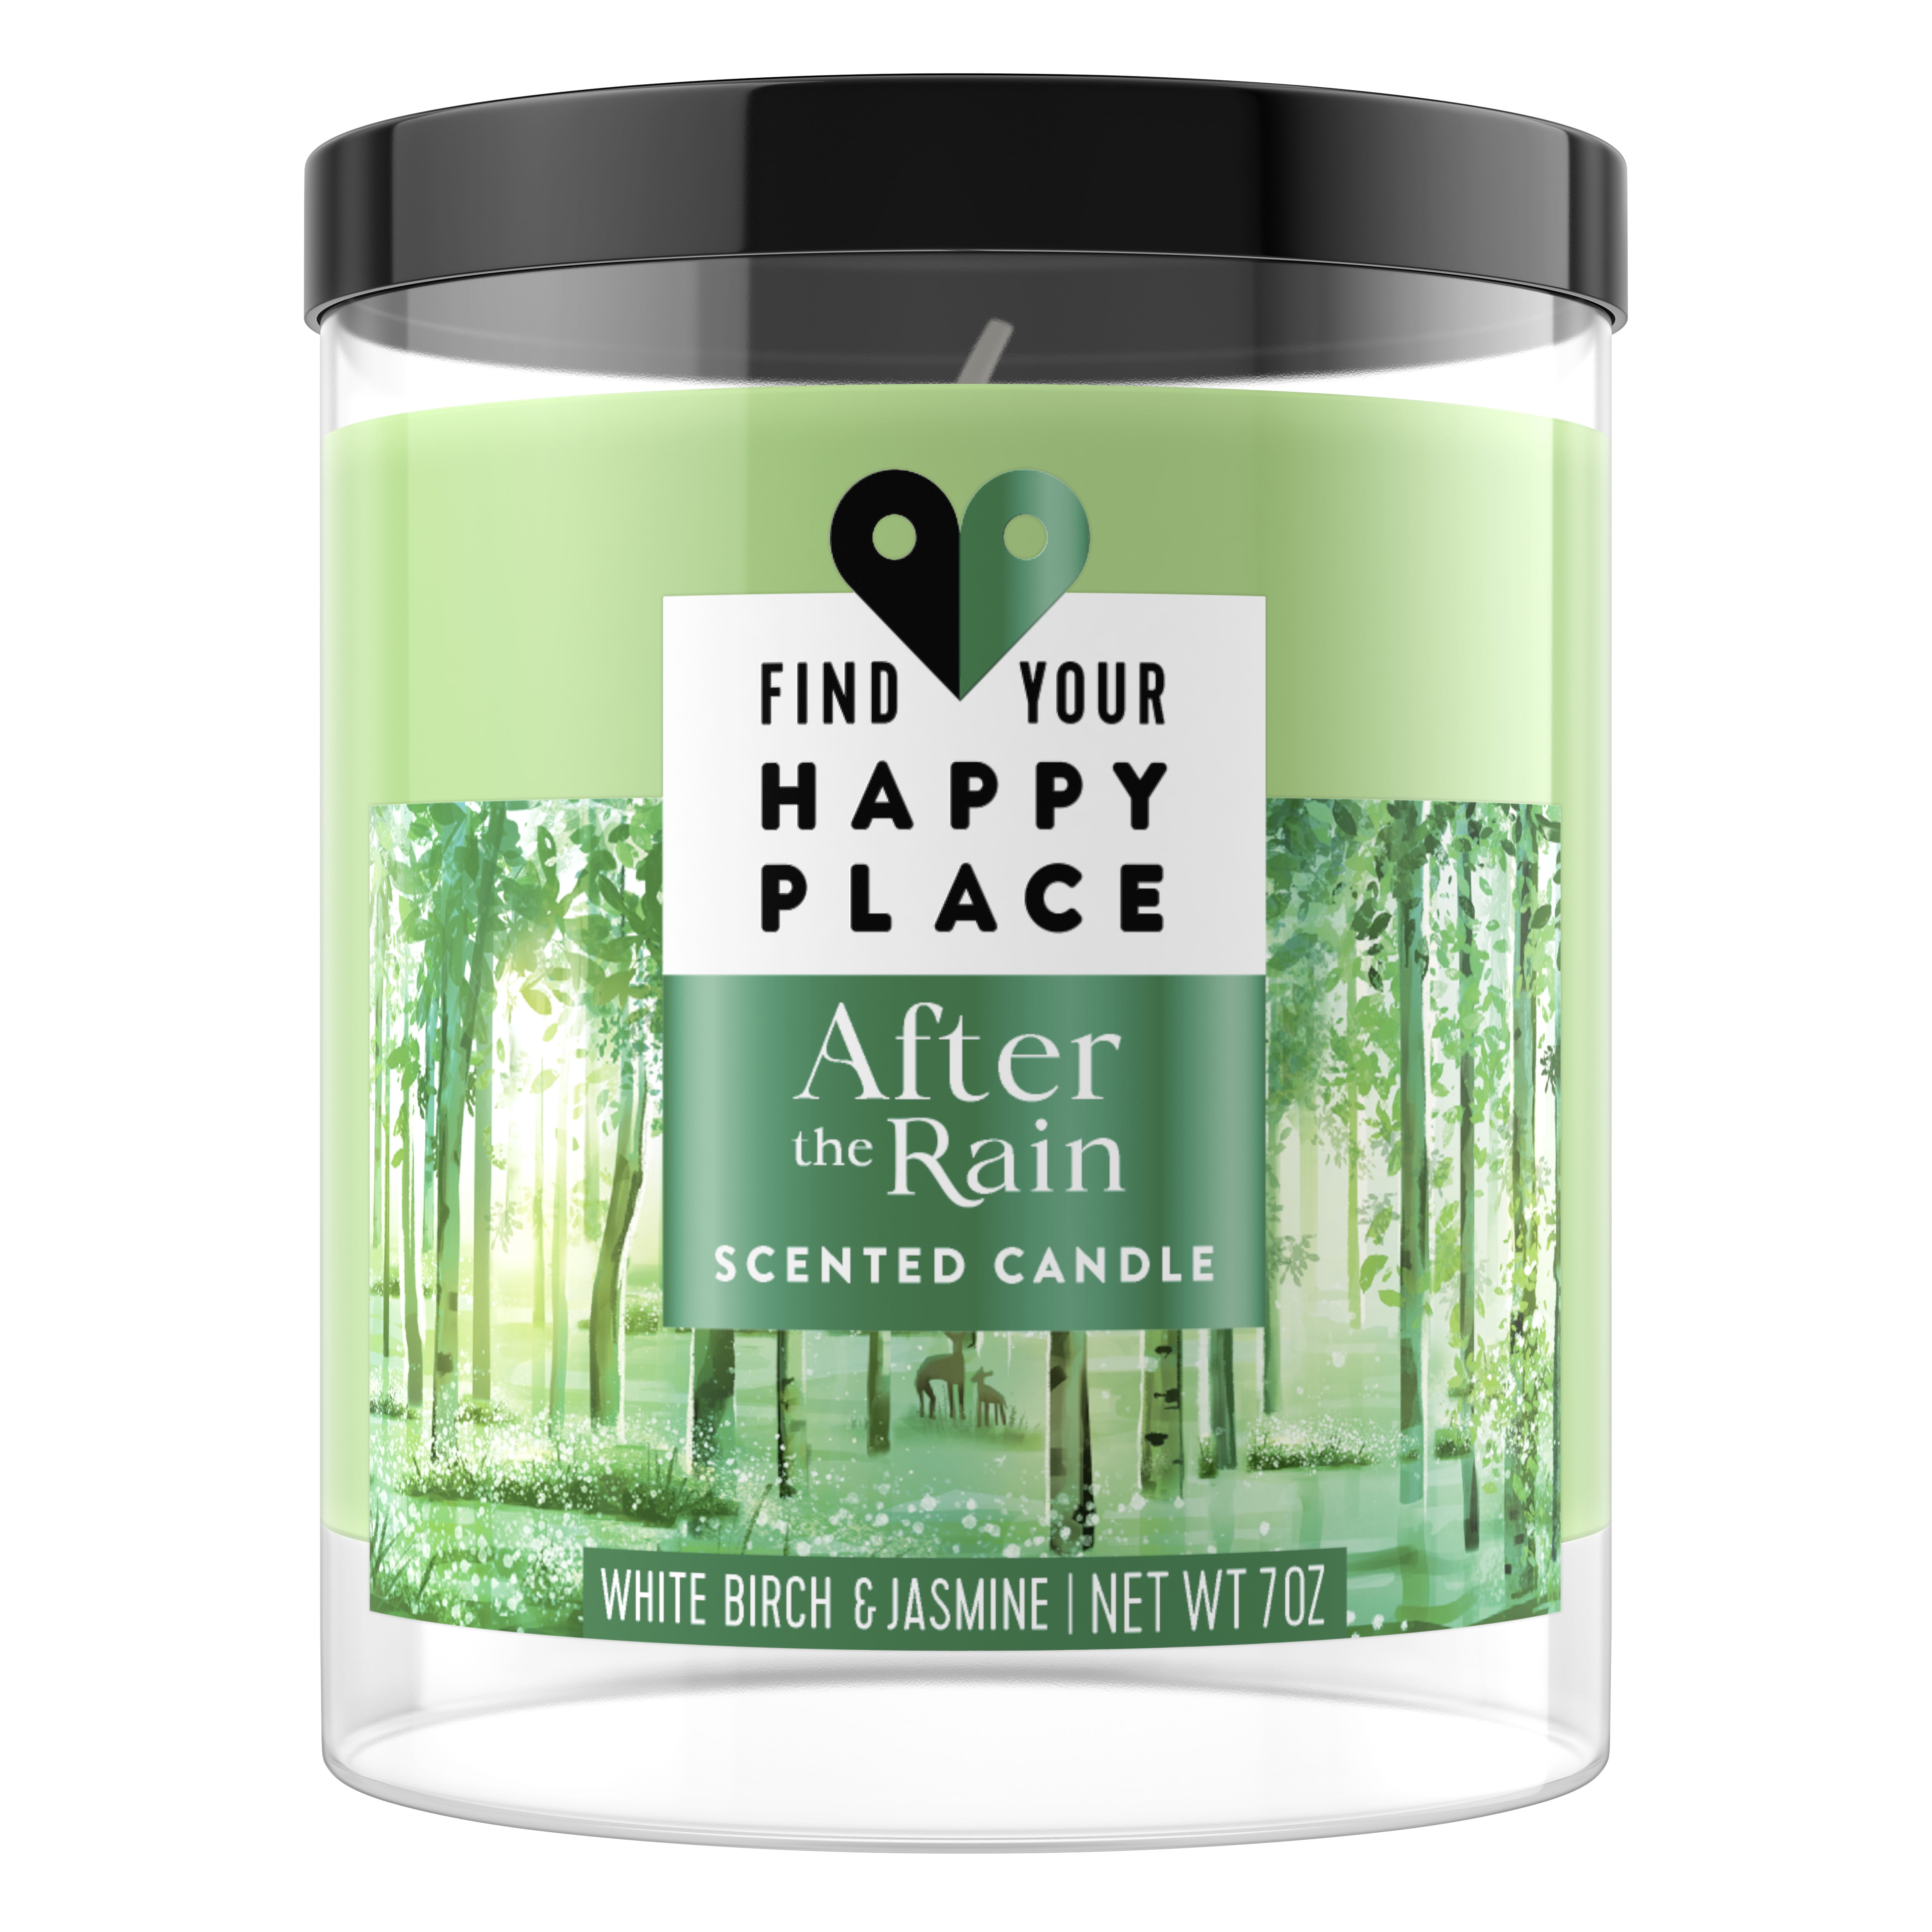 Find Your Happy Place Scented Jar Candle After The Rain White Birch and Jasmine,7 oz